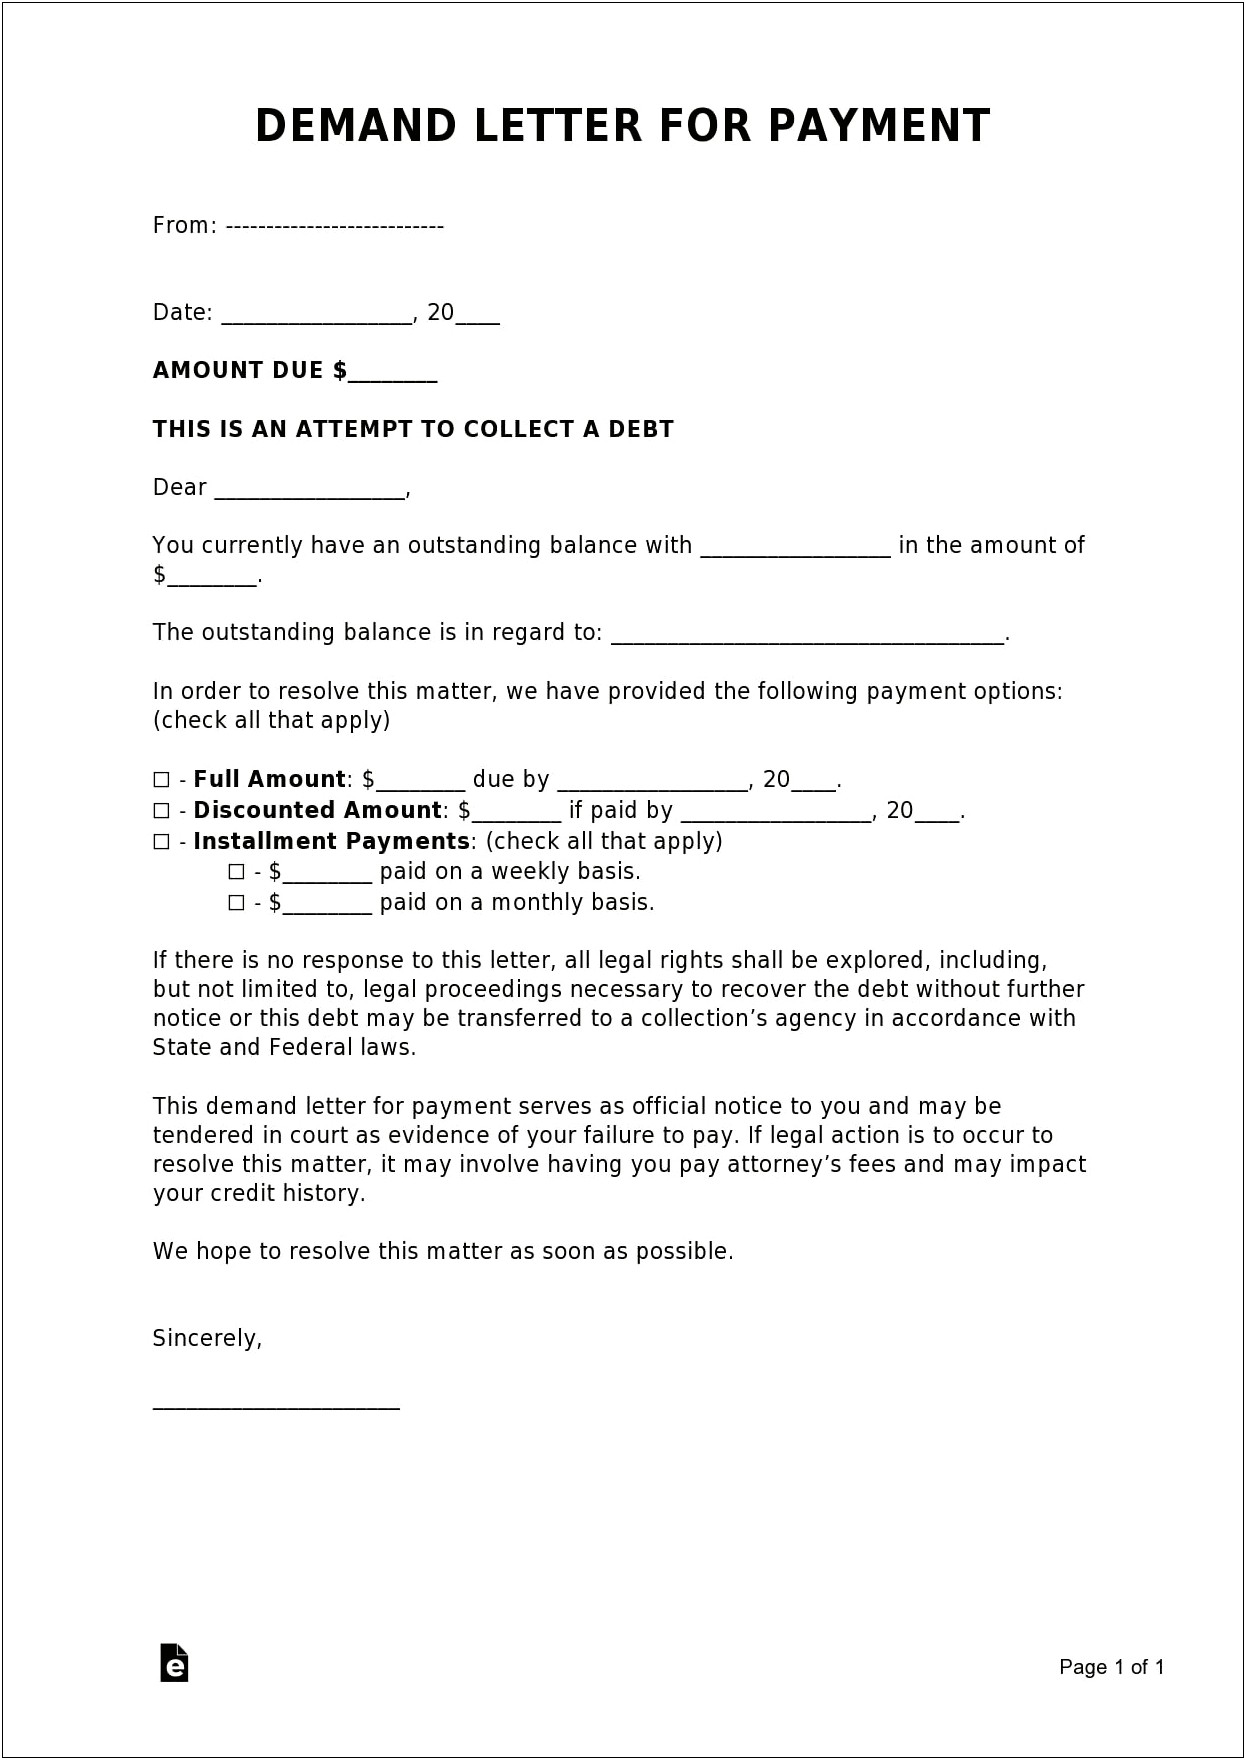 10 Day Demand Letter Payment Template